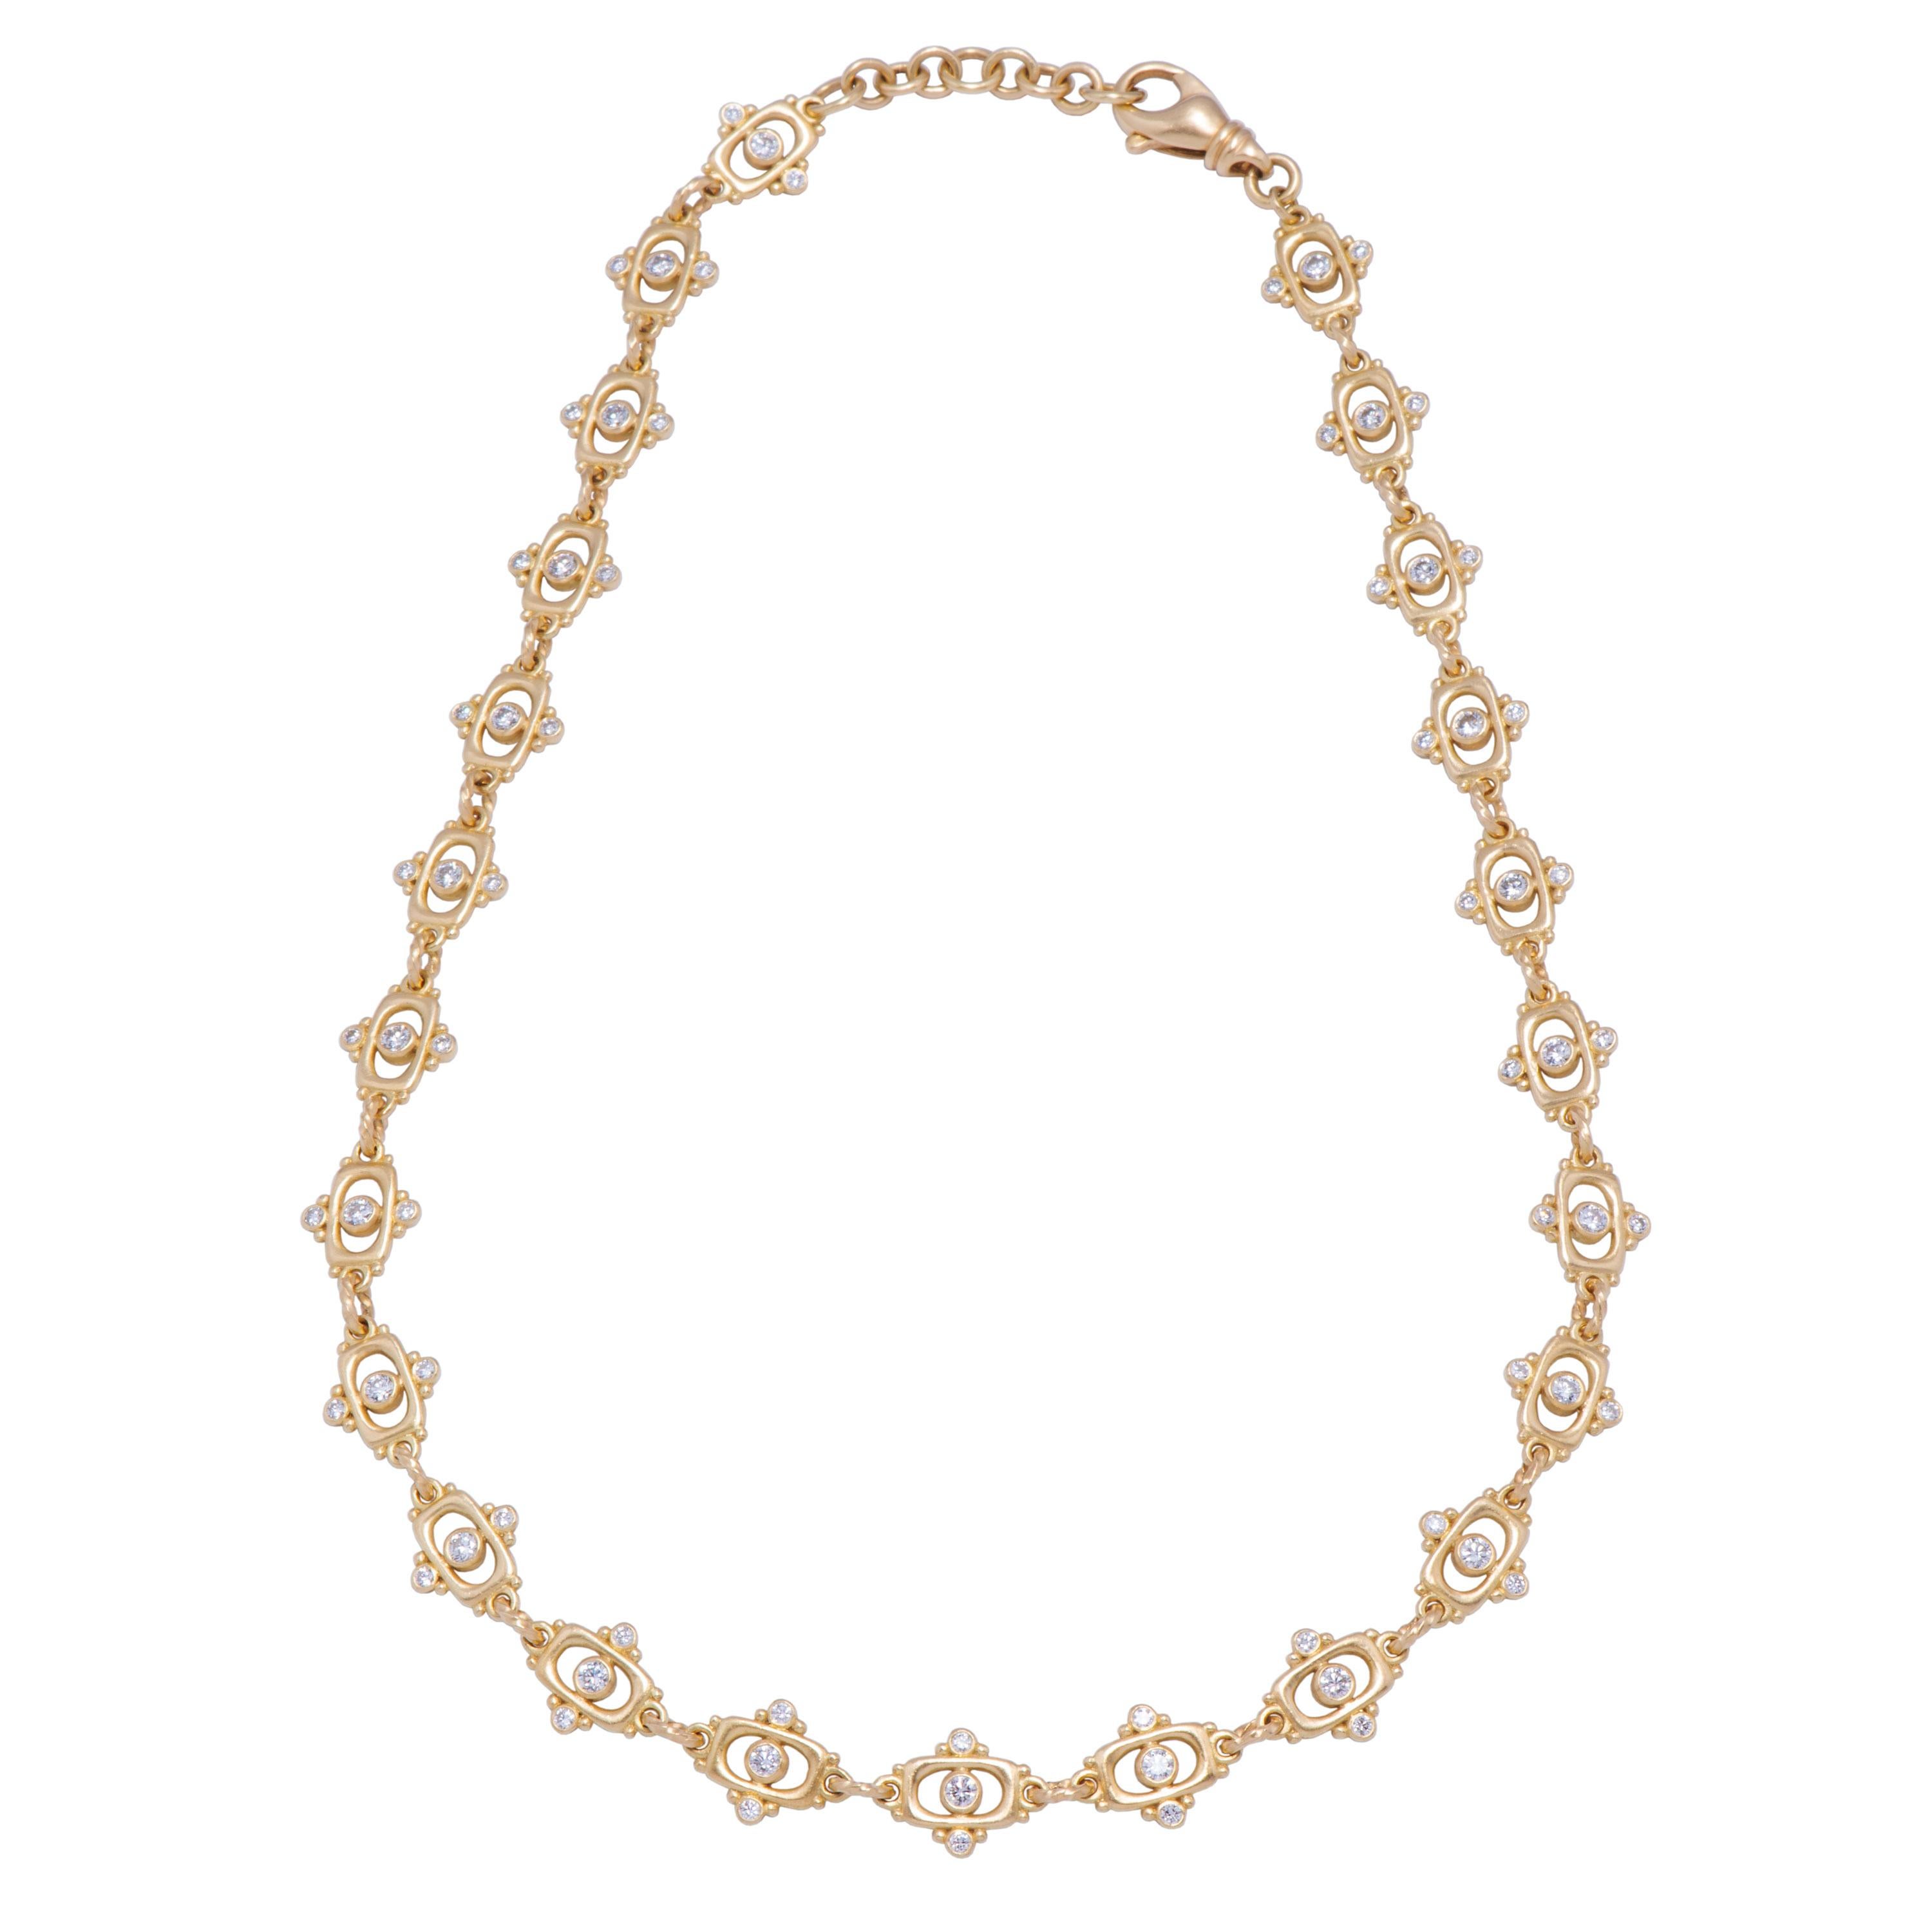 If understated luxury is your preferred mode of self-expression, this necklace speaks volumes! Twenty-four 18kt gold tabla links studded with gold beads and white diamonds 3.84tcw drape beautifully and are fitted with an 18kt gold lobster clasp for